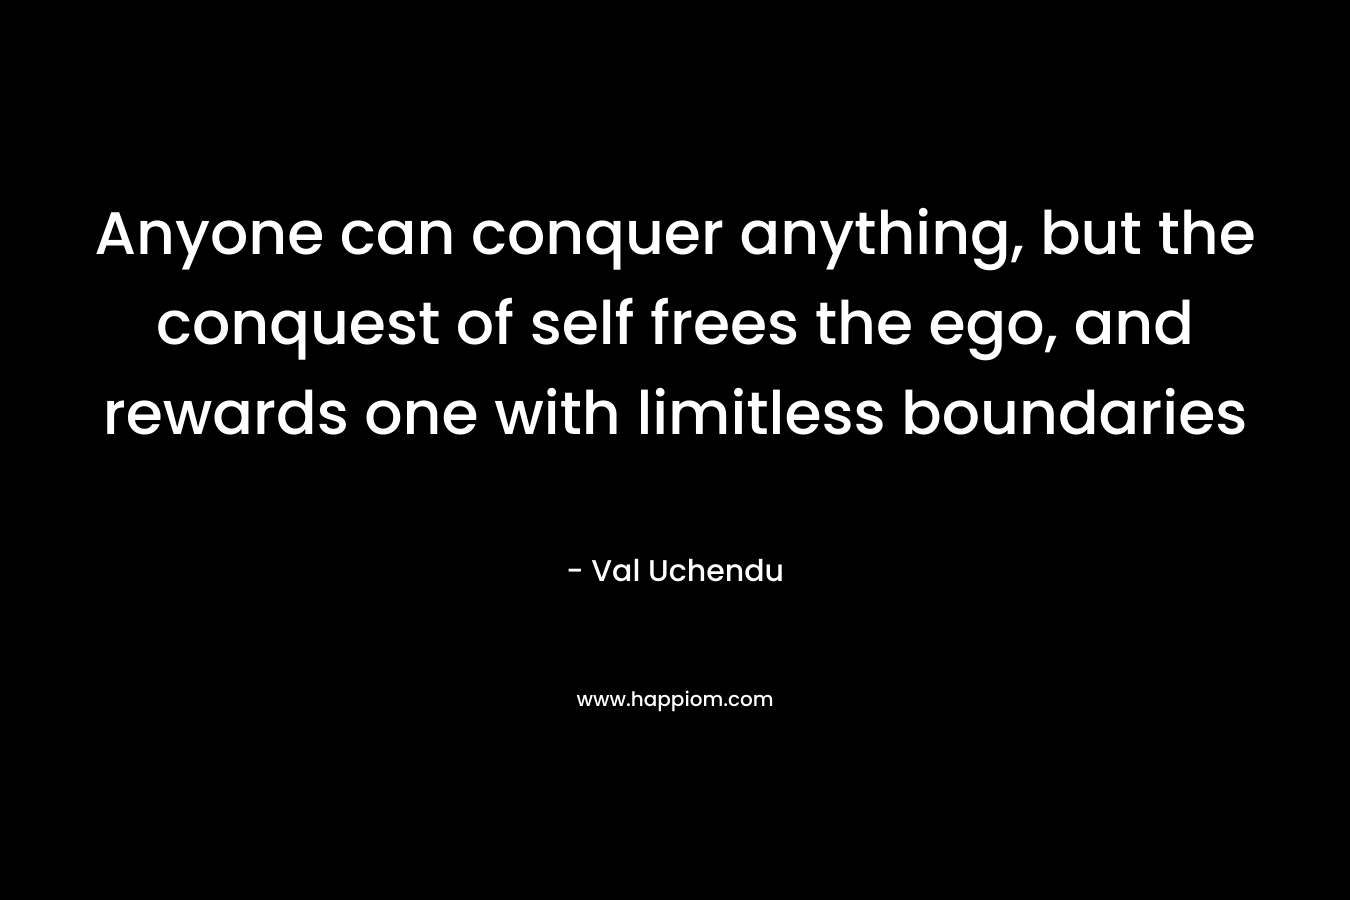 Anyone can conquer anything, but the conquest of self frees the ego, and rewards one with limitless boundaries